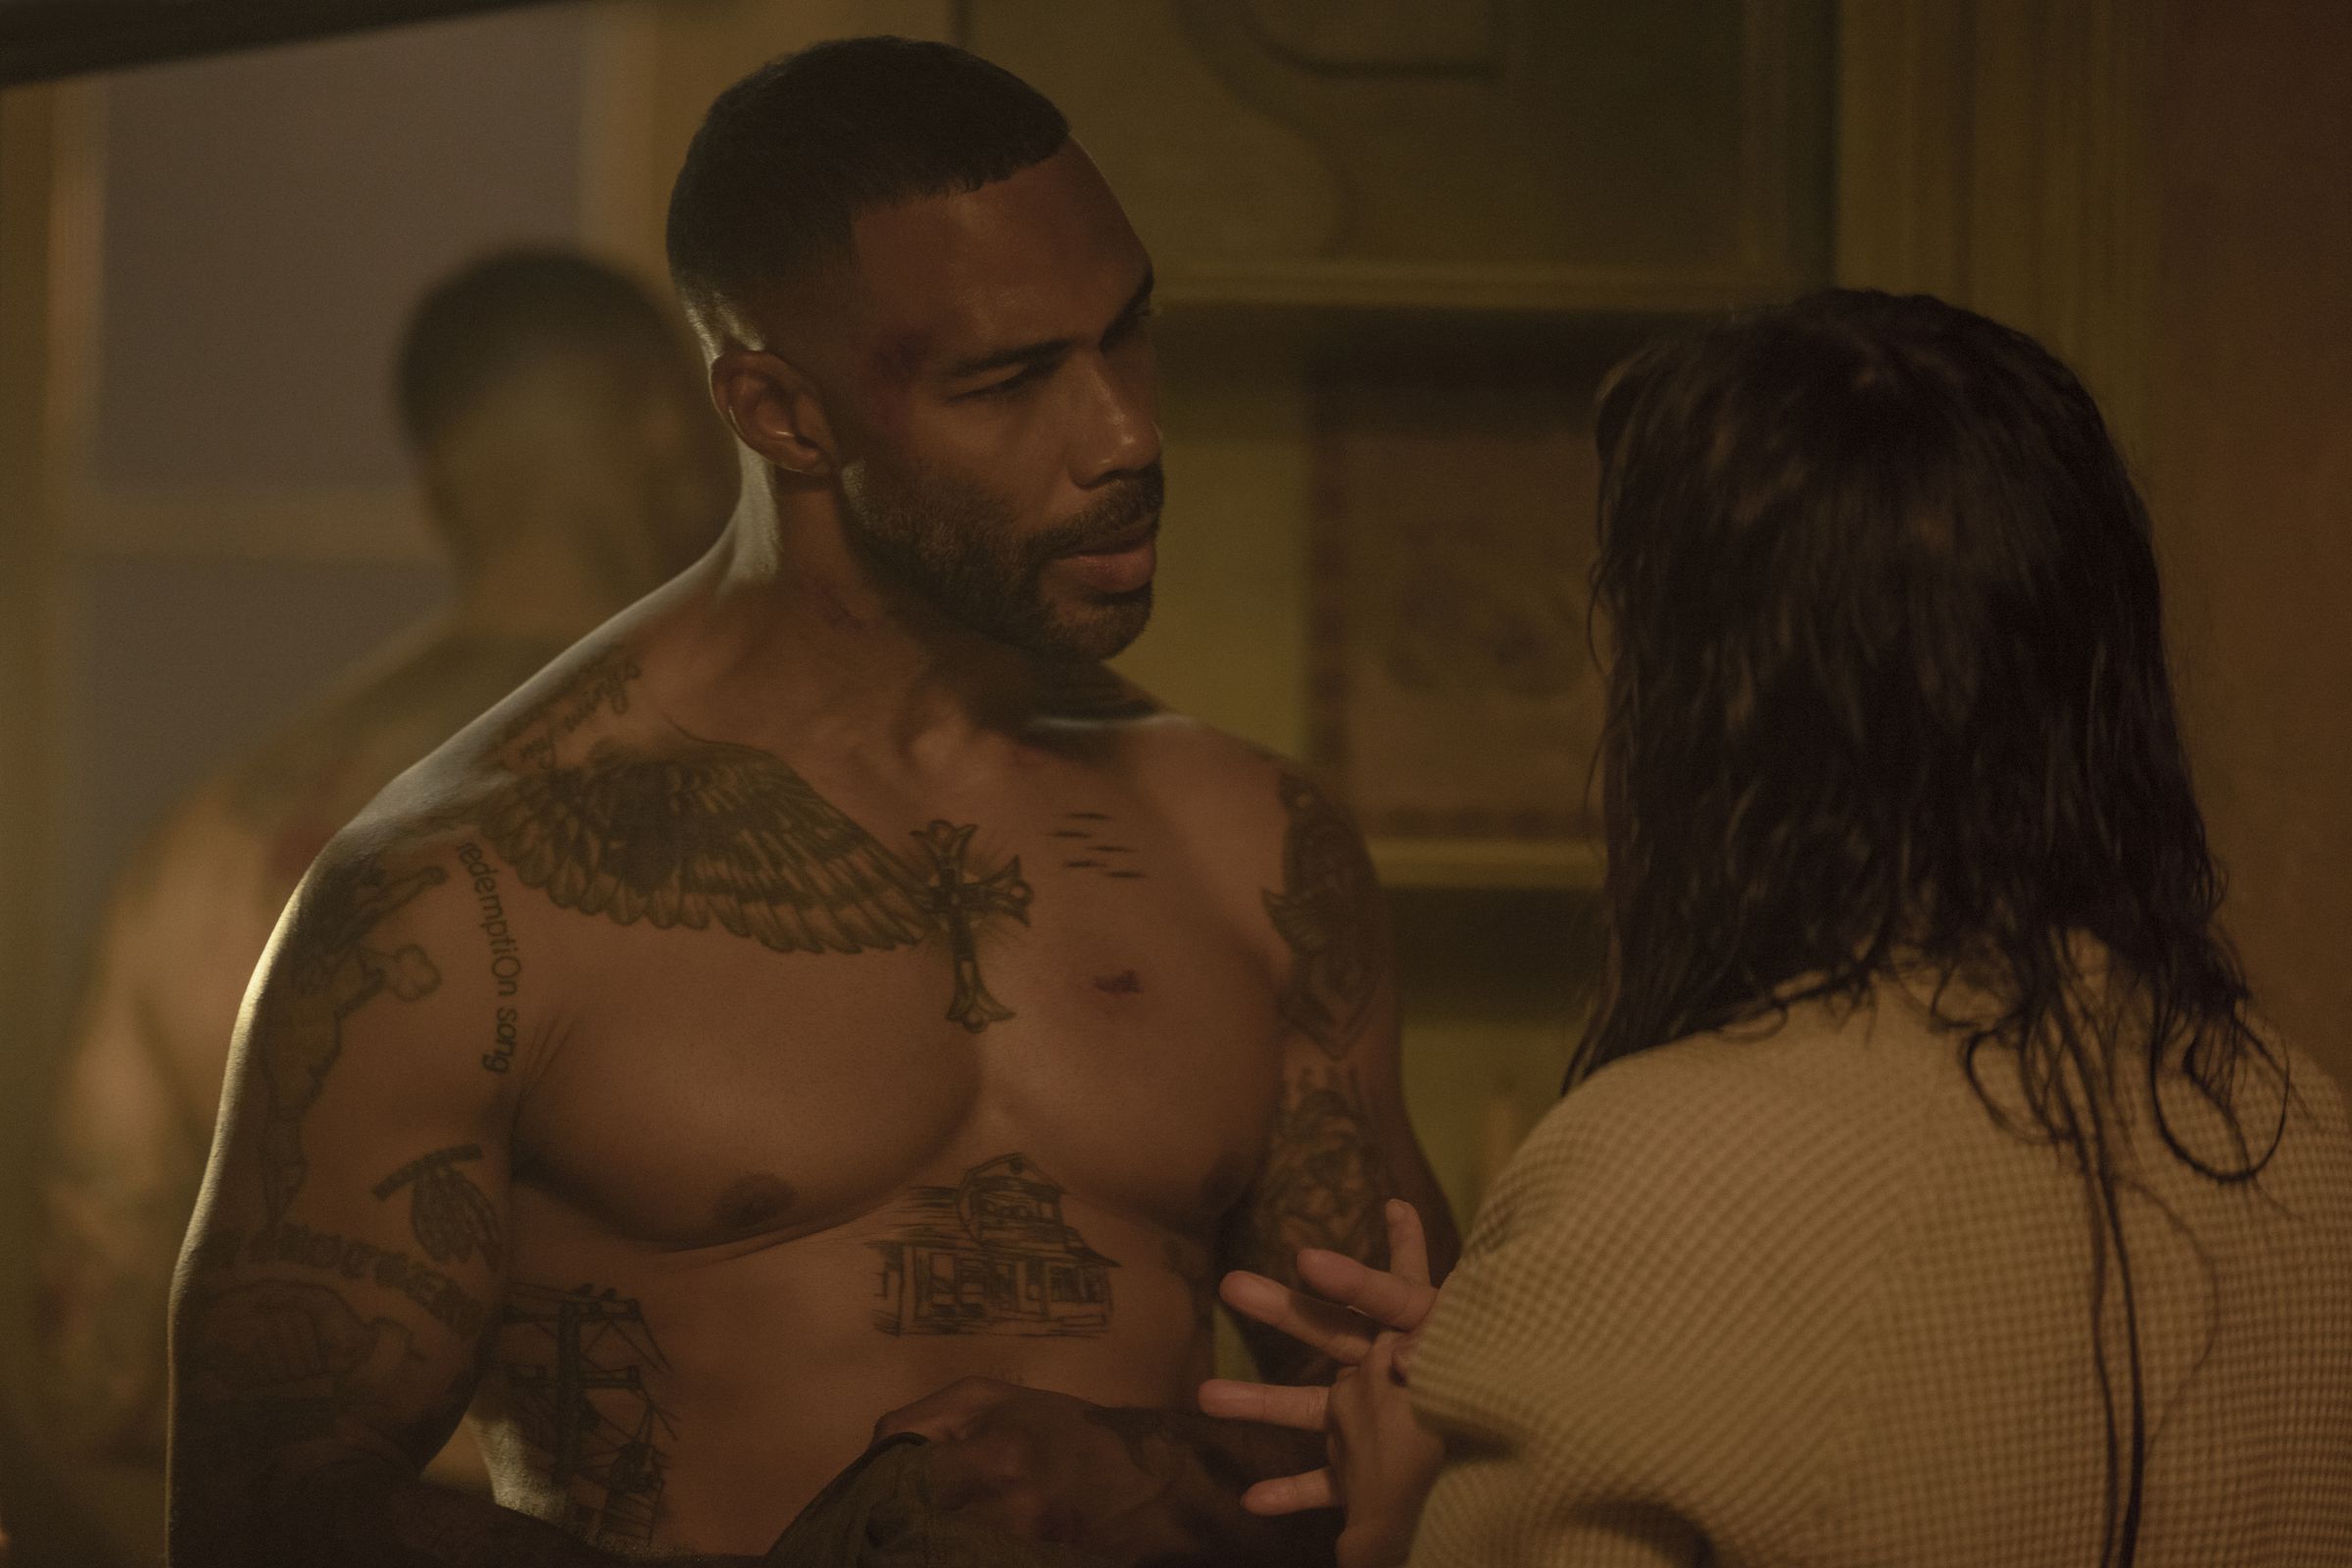 Omari Hardwicke, a Black Man, is wearing no shirt, showing off his physique and tattoos. Jennifer Lopez is speaking to him, but only the back of her head is visible.